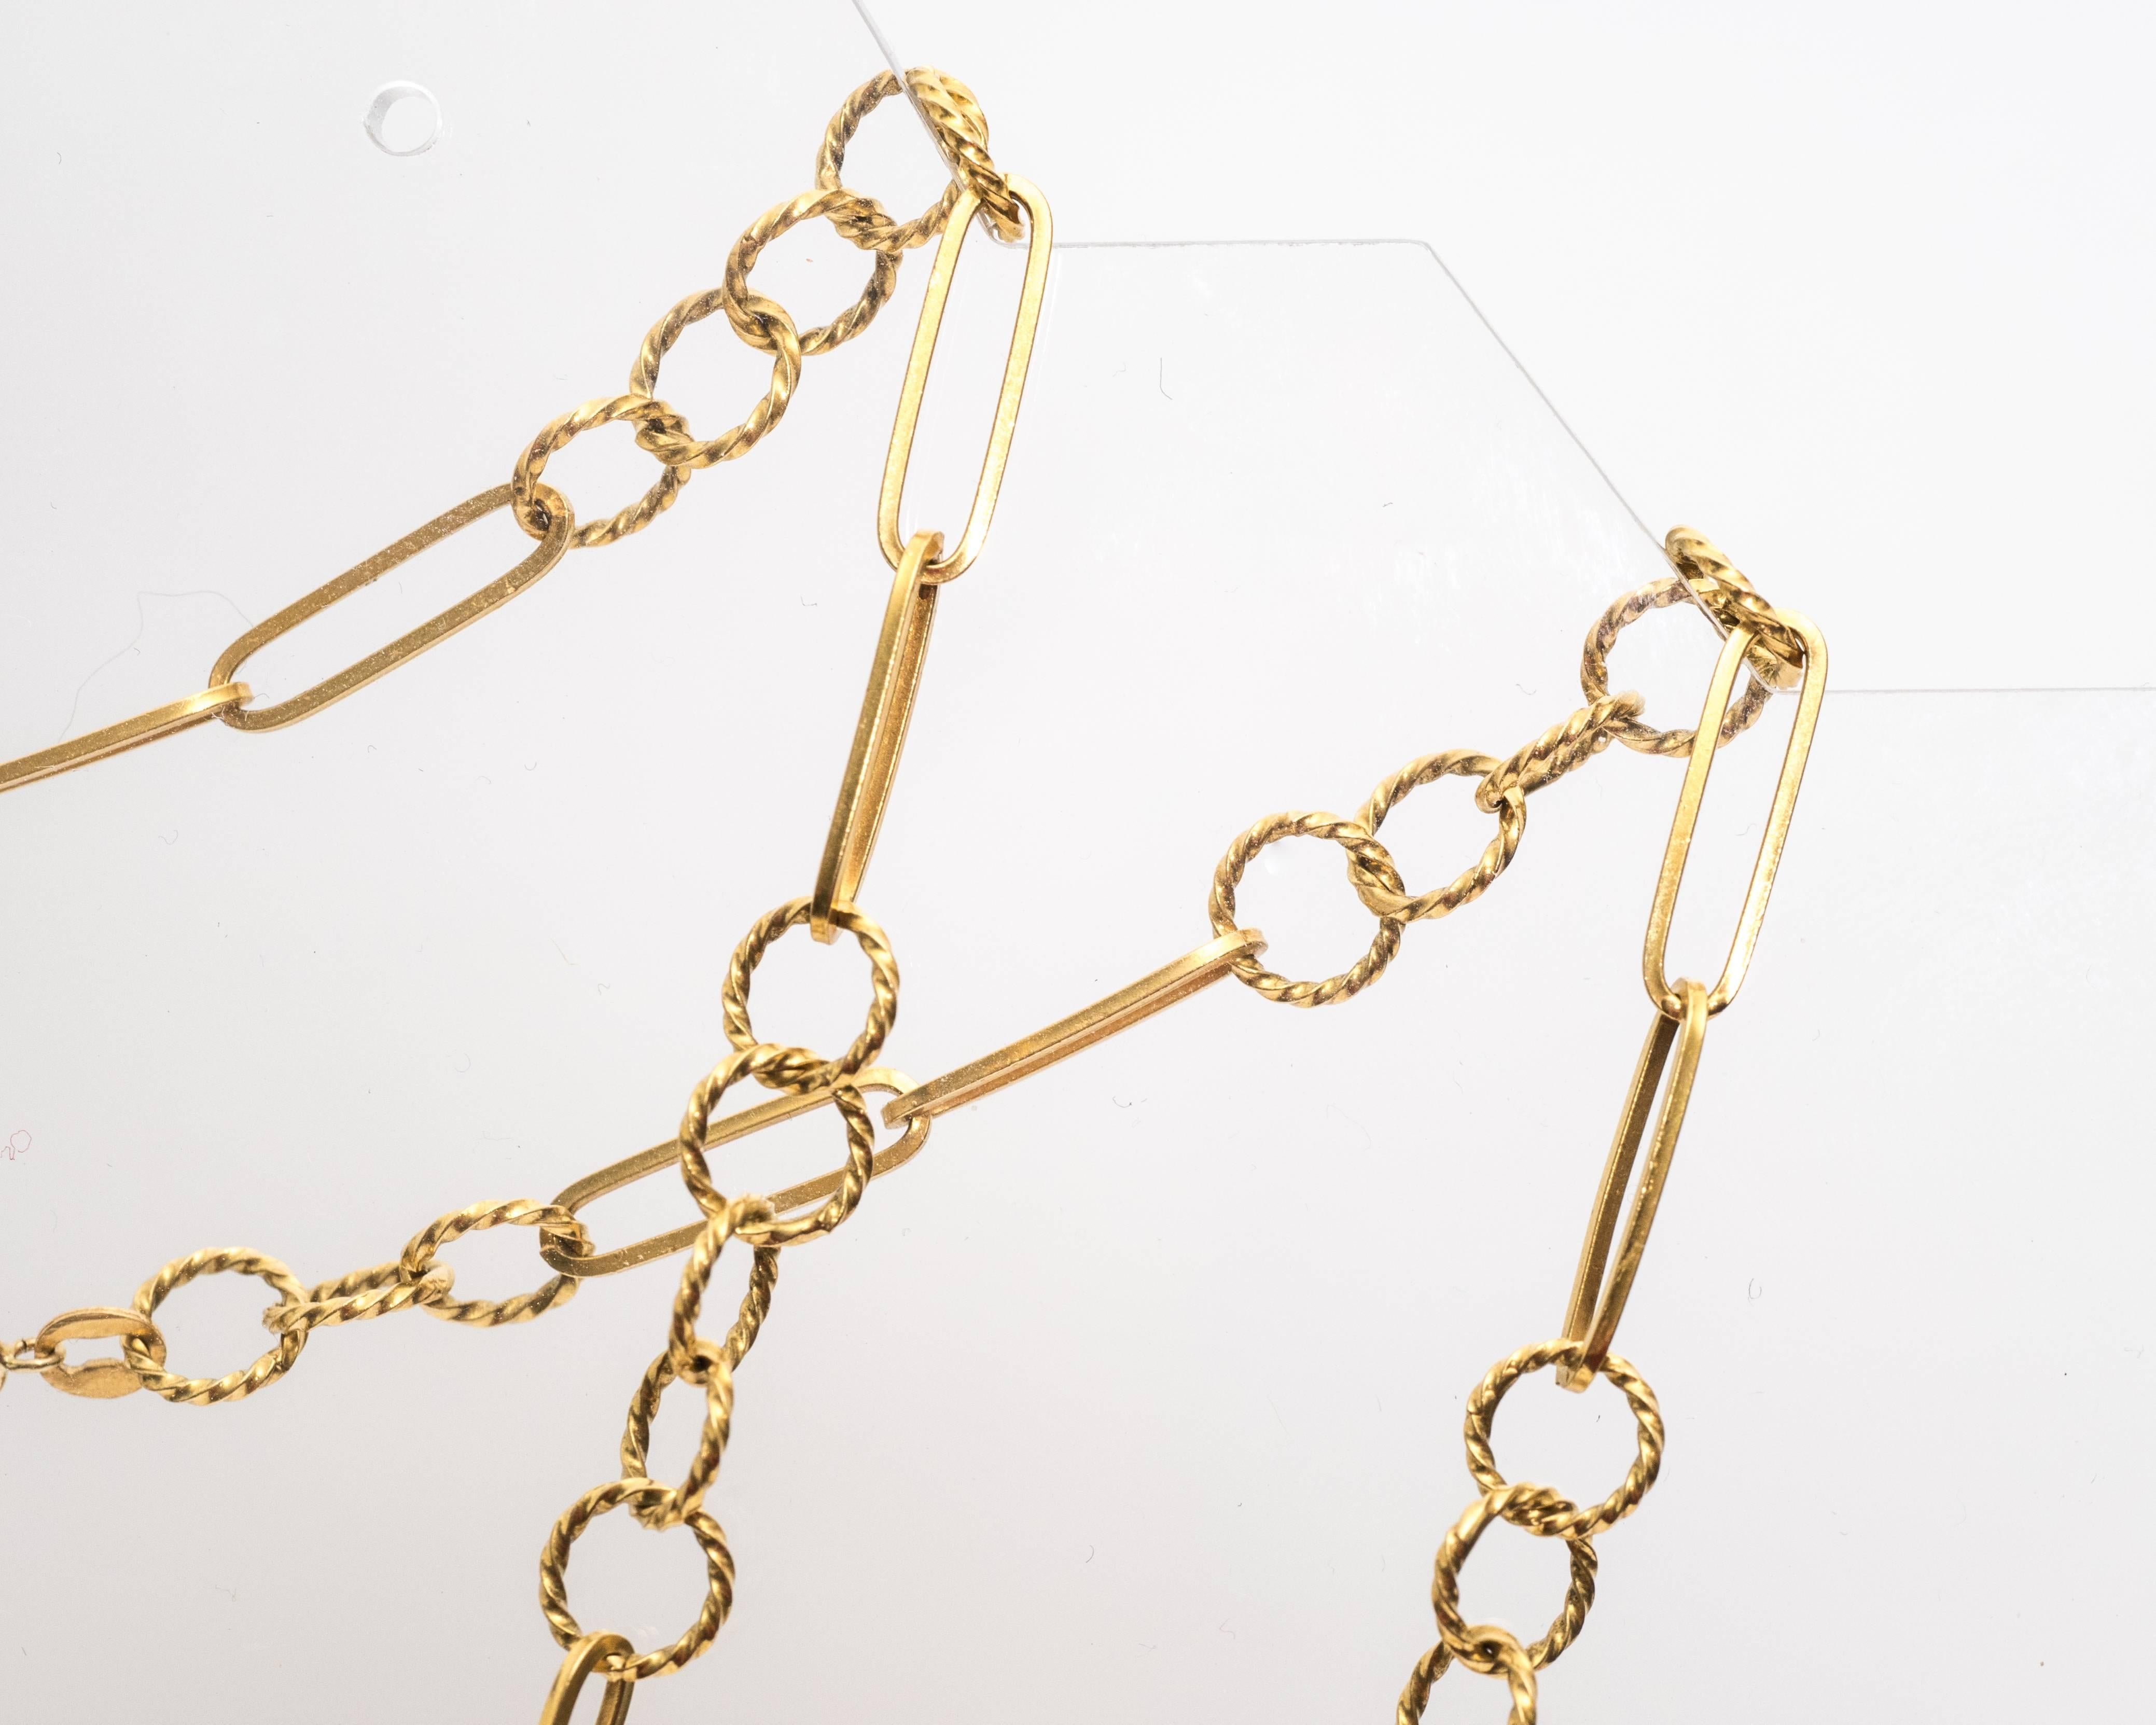 1950s Long Gorgeous 18 Karat Gold Necklace by Iconic Designer Tiffany & Co.
32 Inches Length
Can be Adorned Multiple Ways - wear as a single strand or double up!
Chain Pattern Alternates from Five Circles to Two long Rectangular Oblong Cutouts.